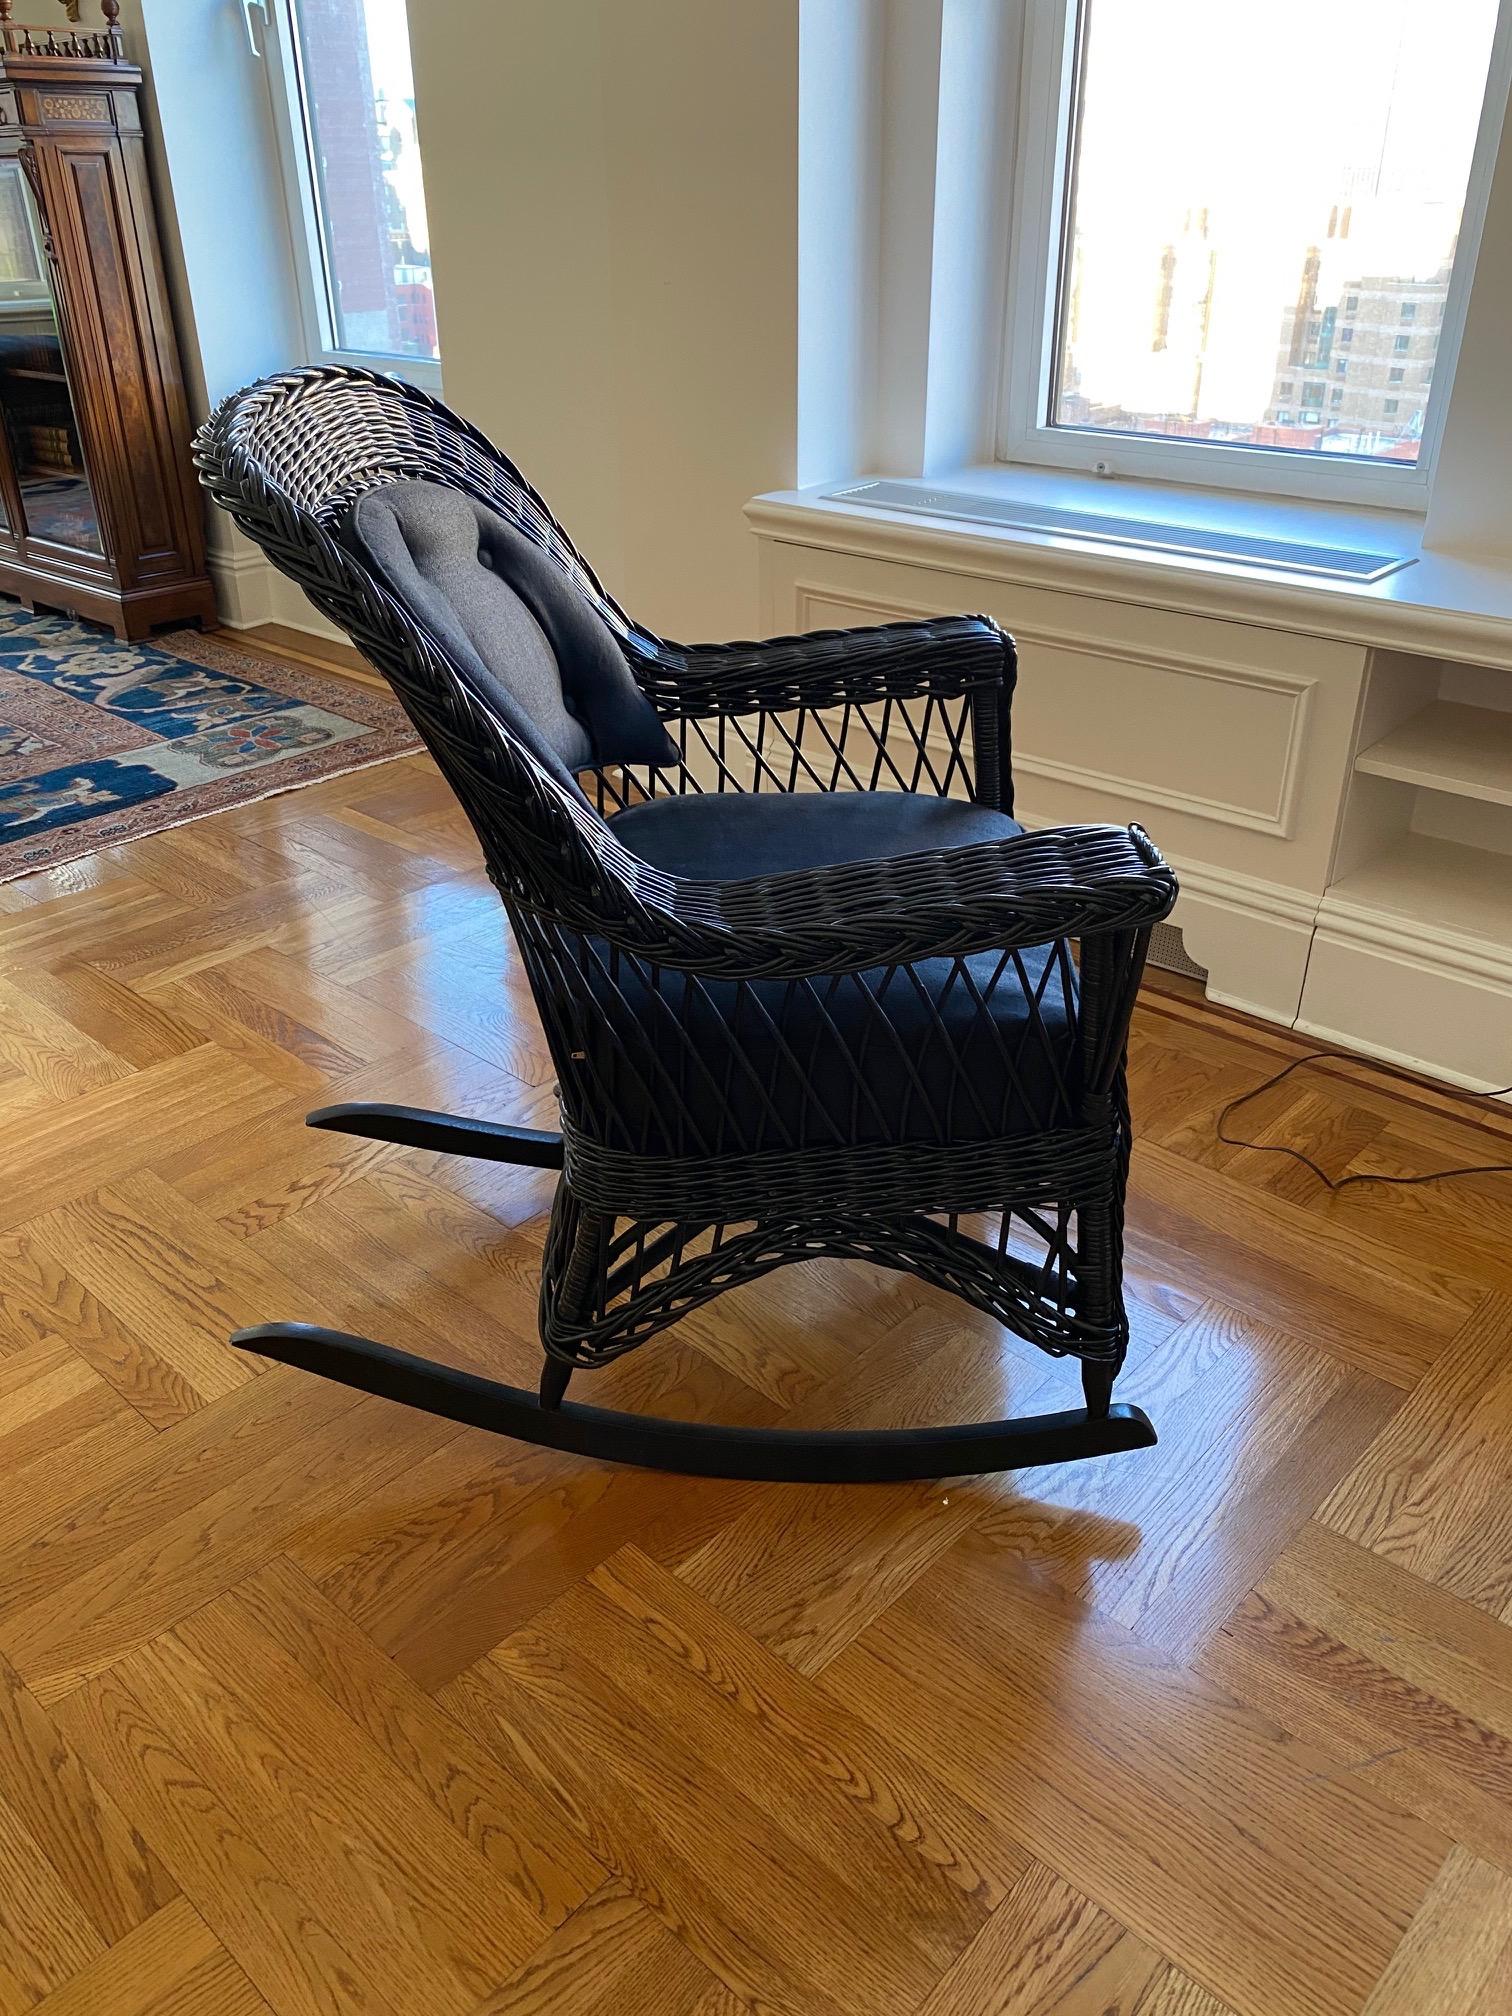 Vintage wicker rocking chair in black finish, upholstered in black linen.
This is a Classic vintage wicker piece was updated with a sharp black finish and upholstered seat and back cushions in black linen. Please note this is part of a larger